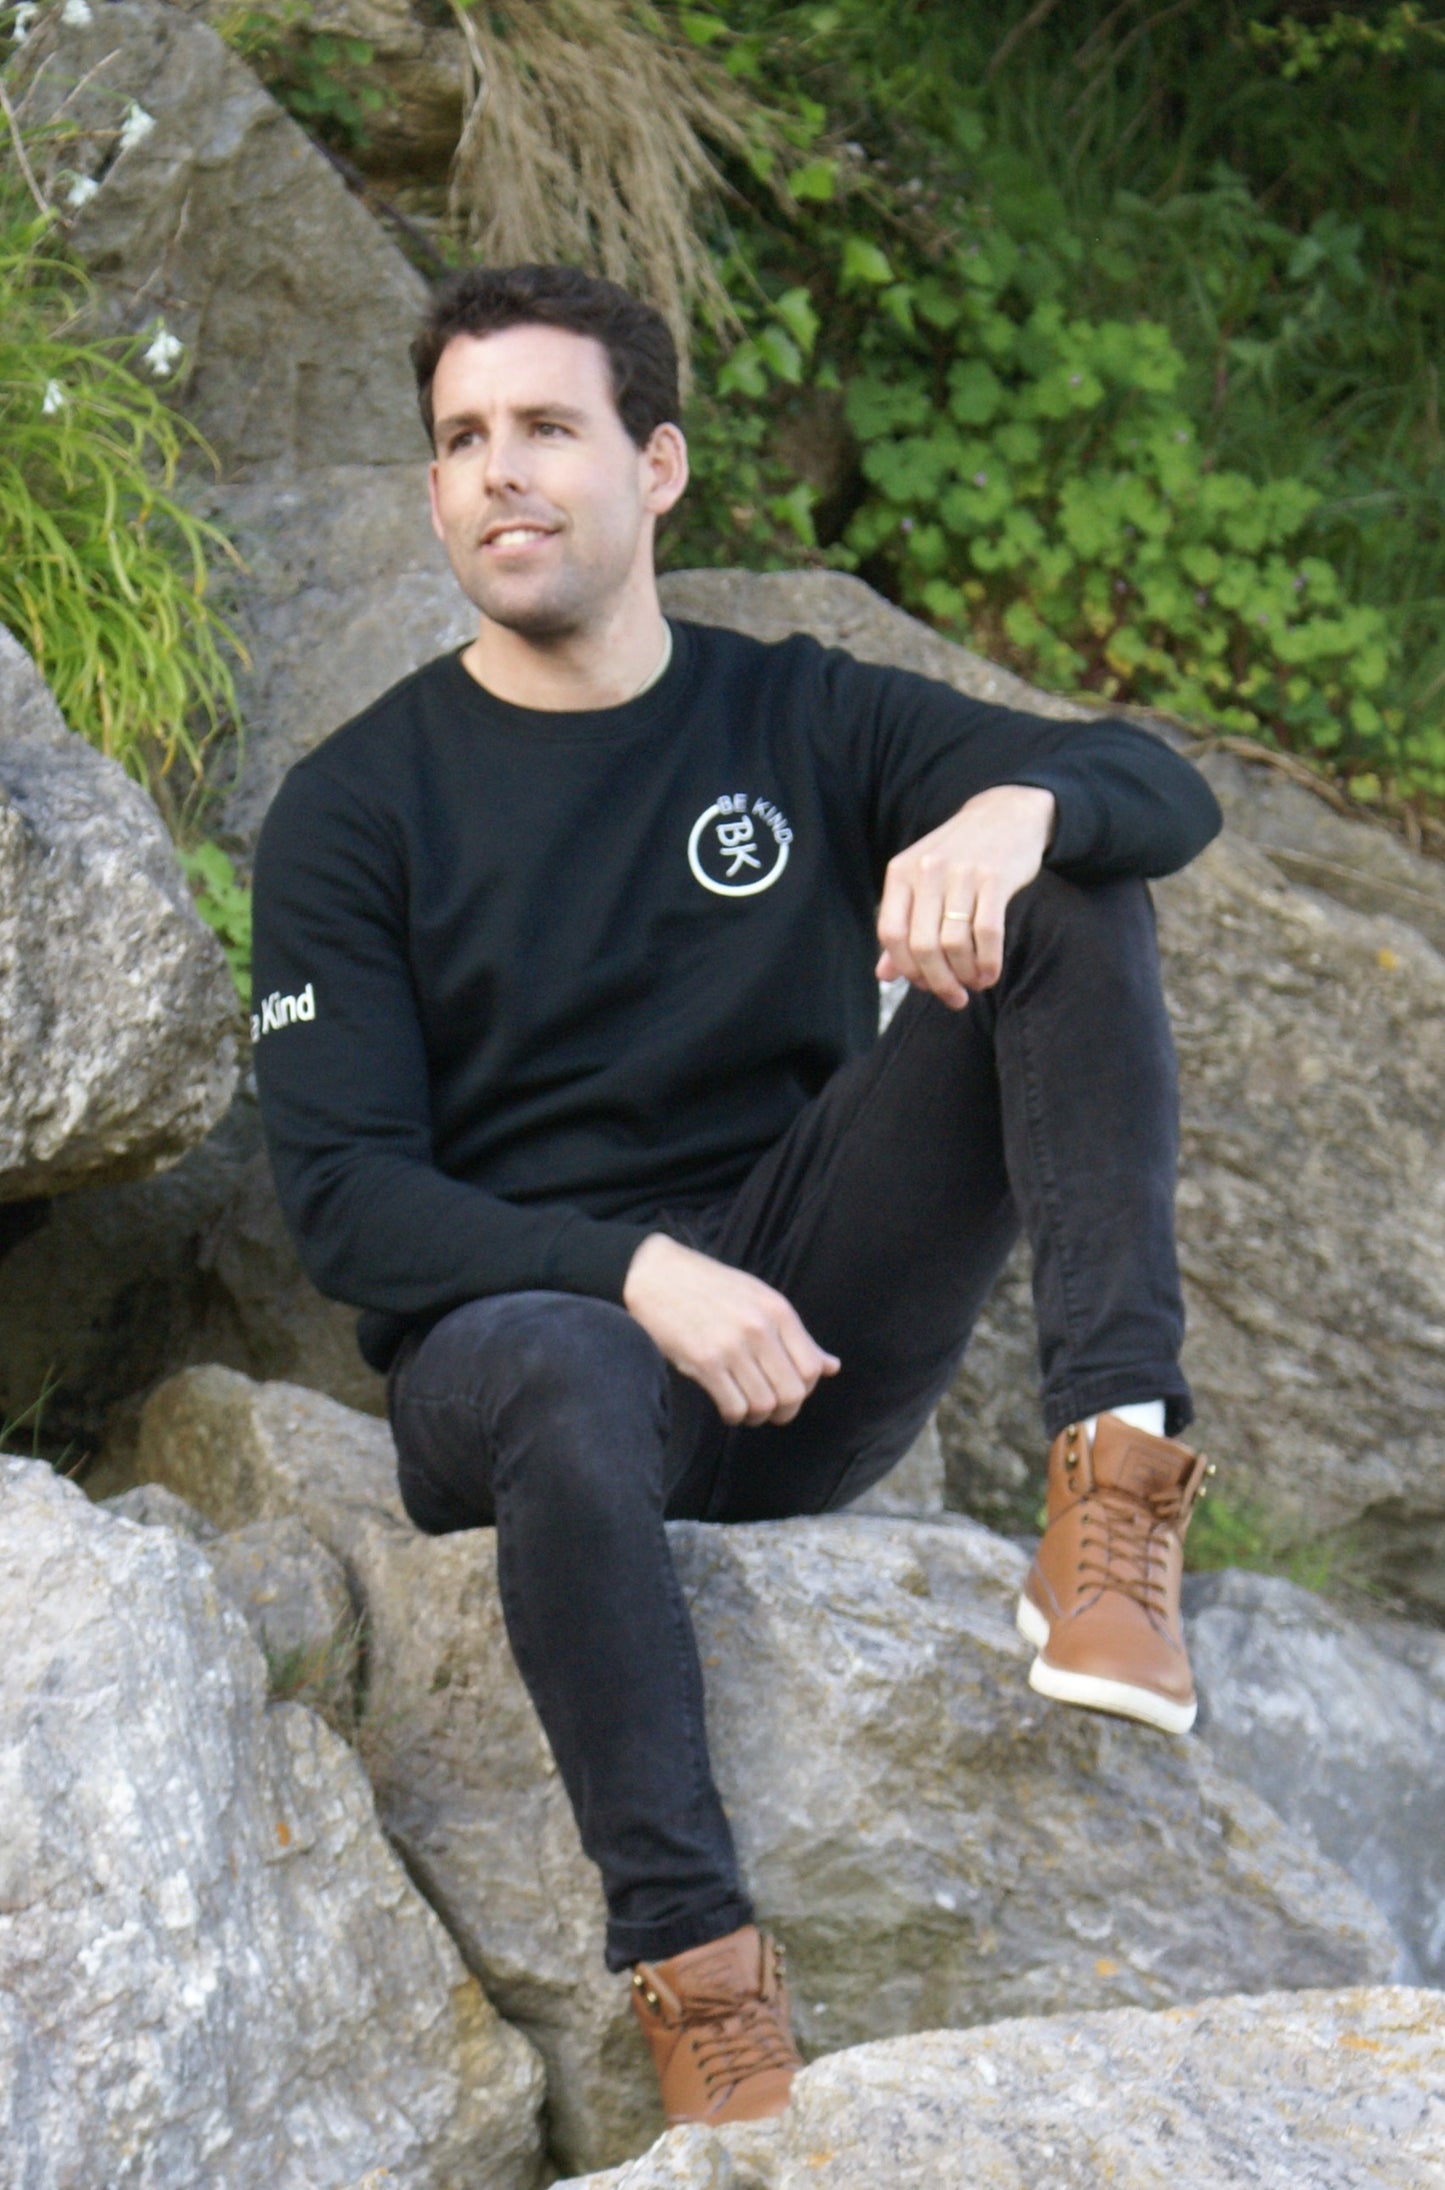 A man sits on some rocks, he's wearing a Black Organic Cotton Sweatshirt from the Be Kind Apparel Original Collection